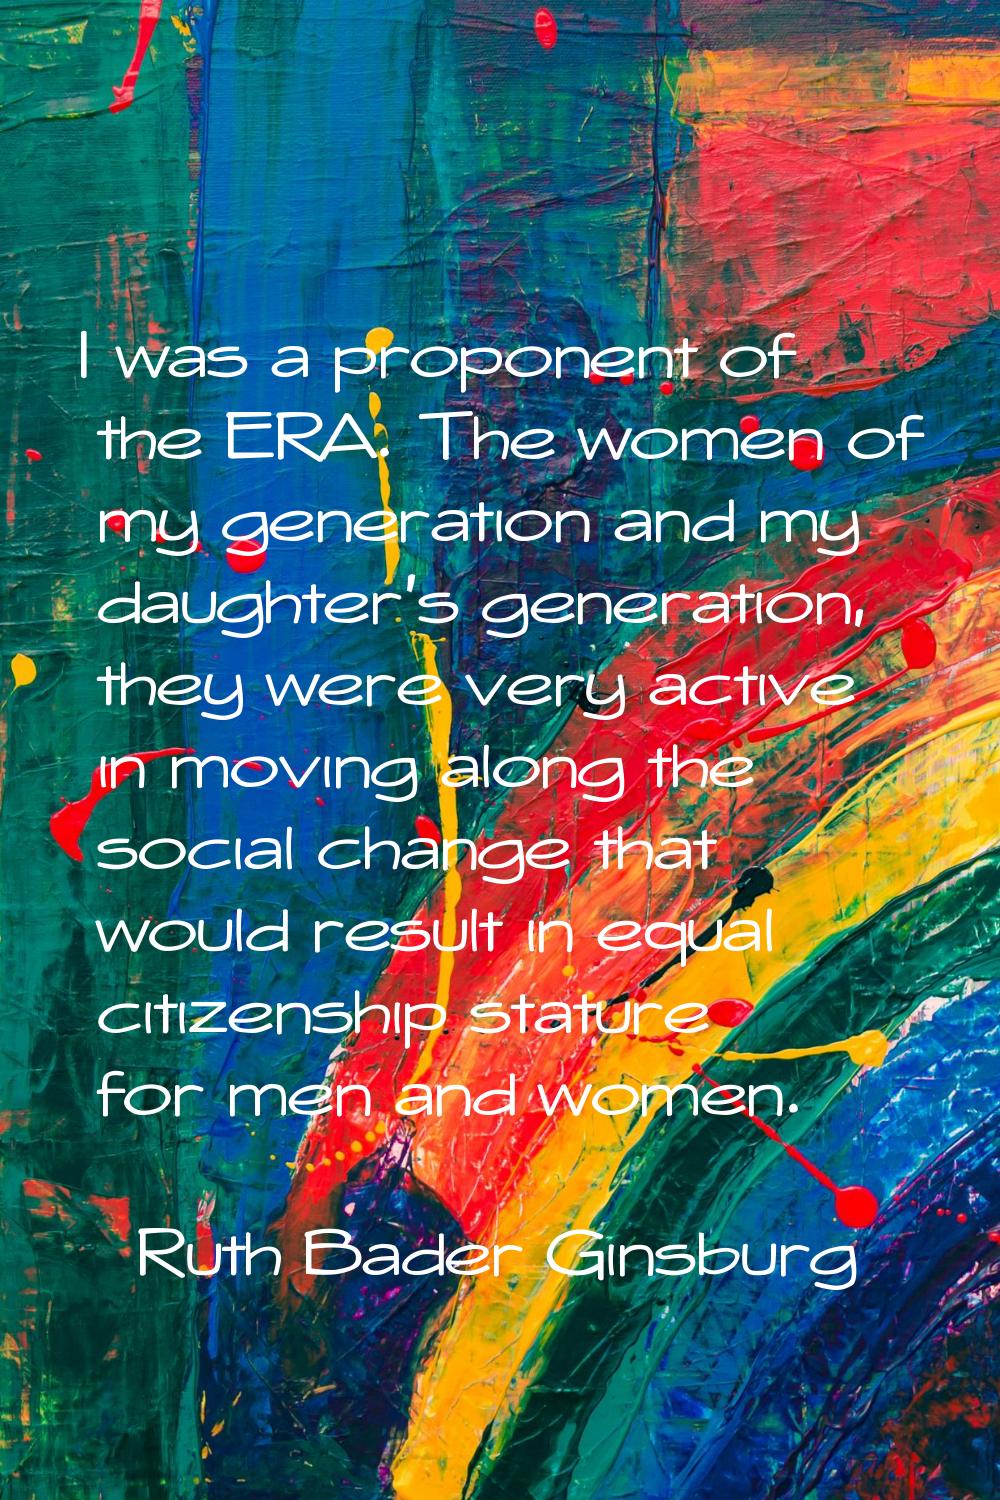 I was a proponent of the ERA. The women of my generation and my daughter's generation, they were ve